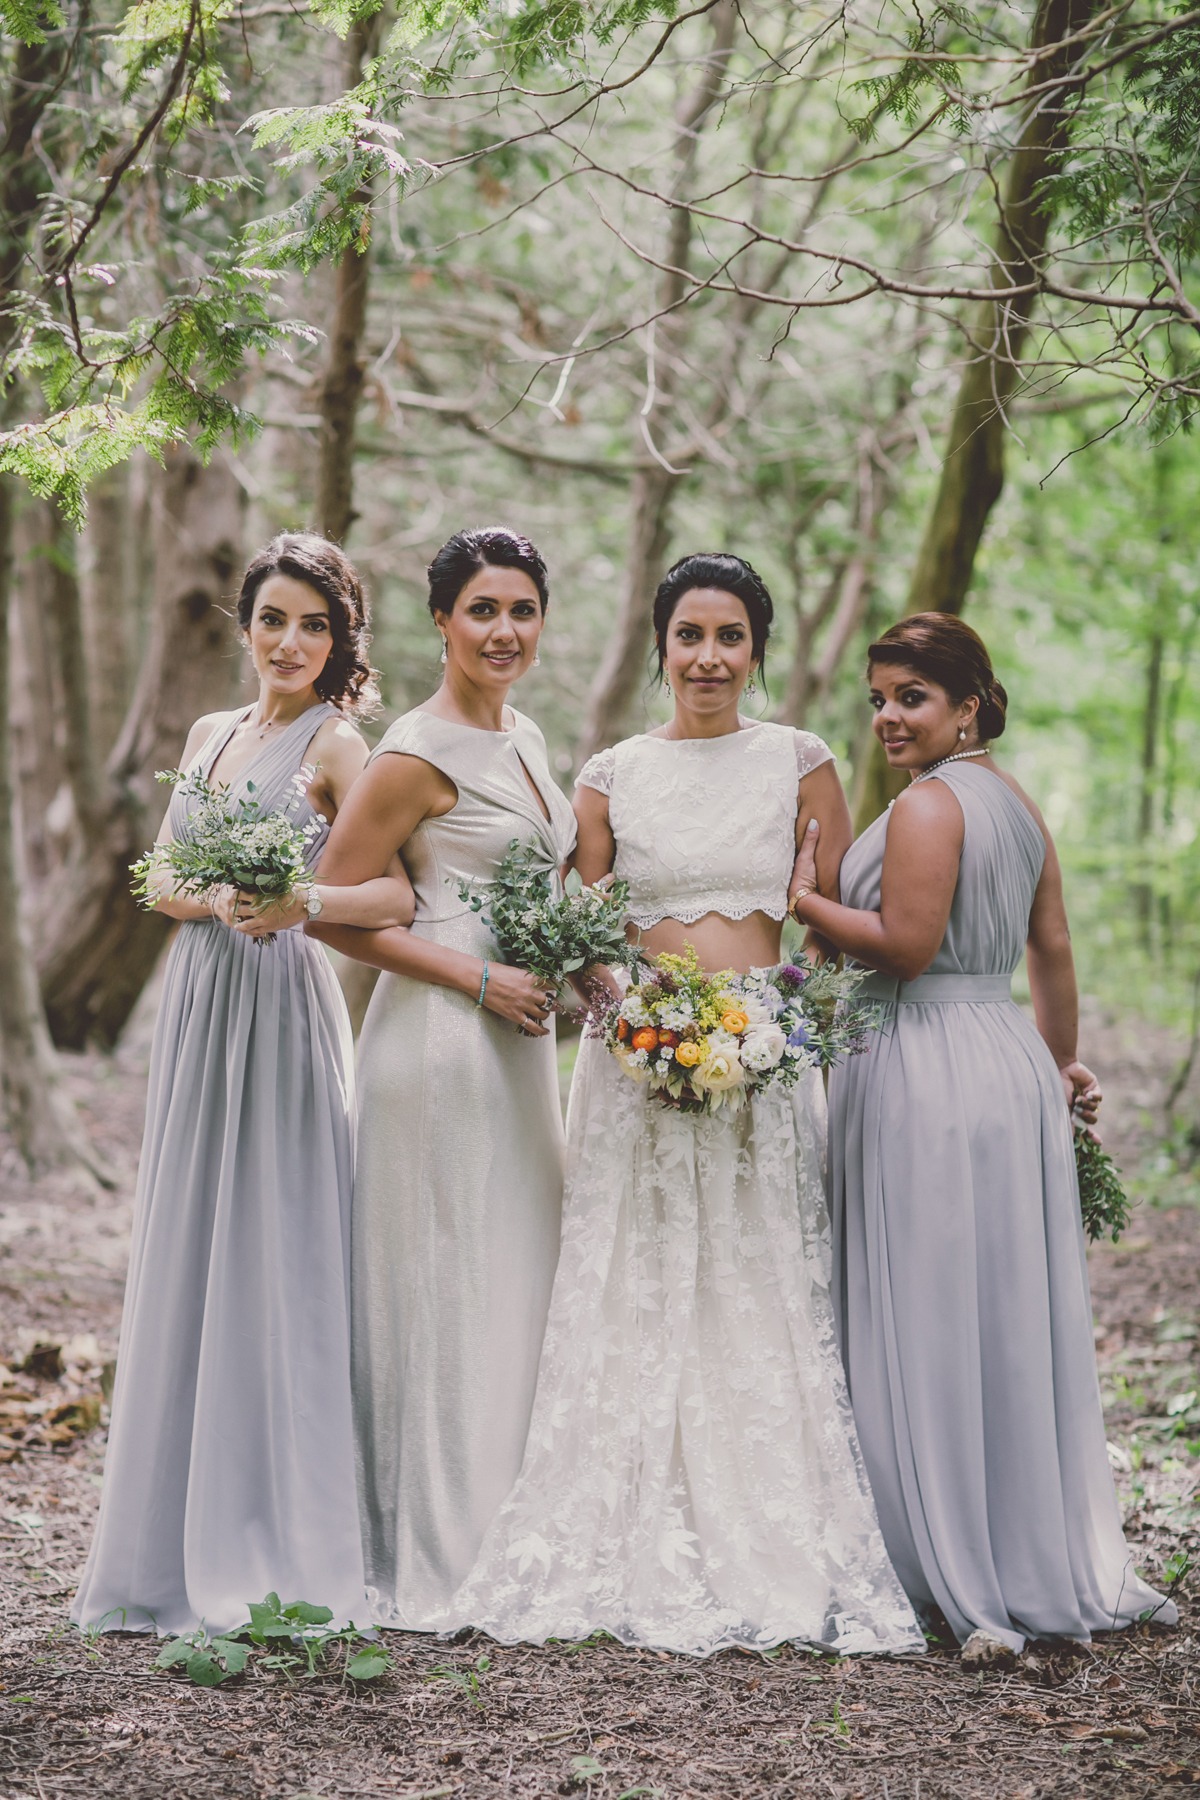 silver and grey bridesmaids and a two piece wedding dress